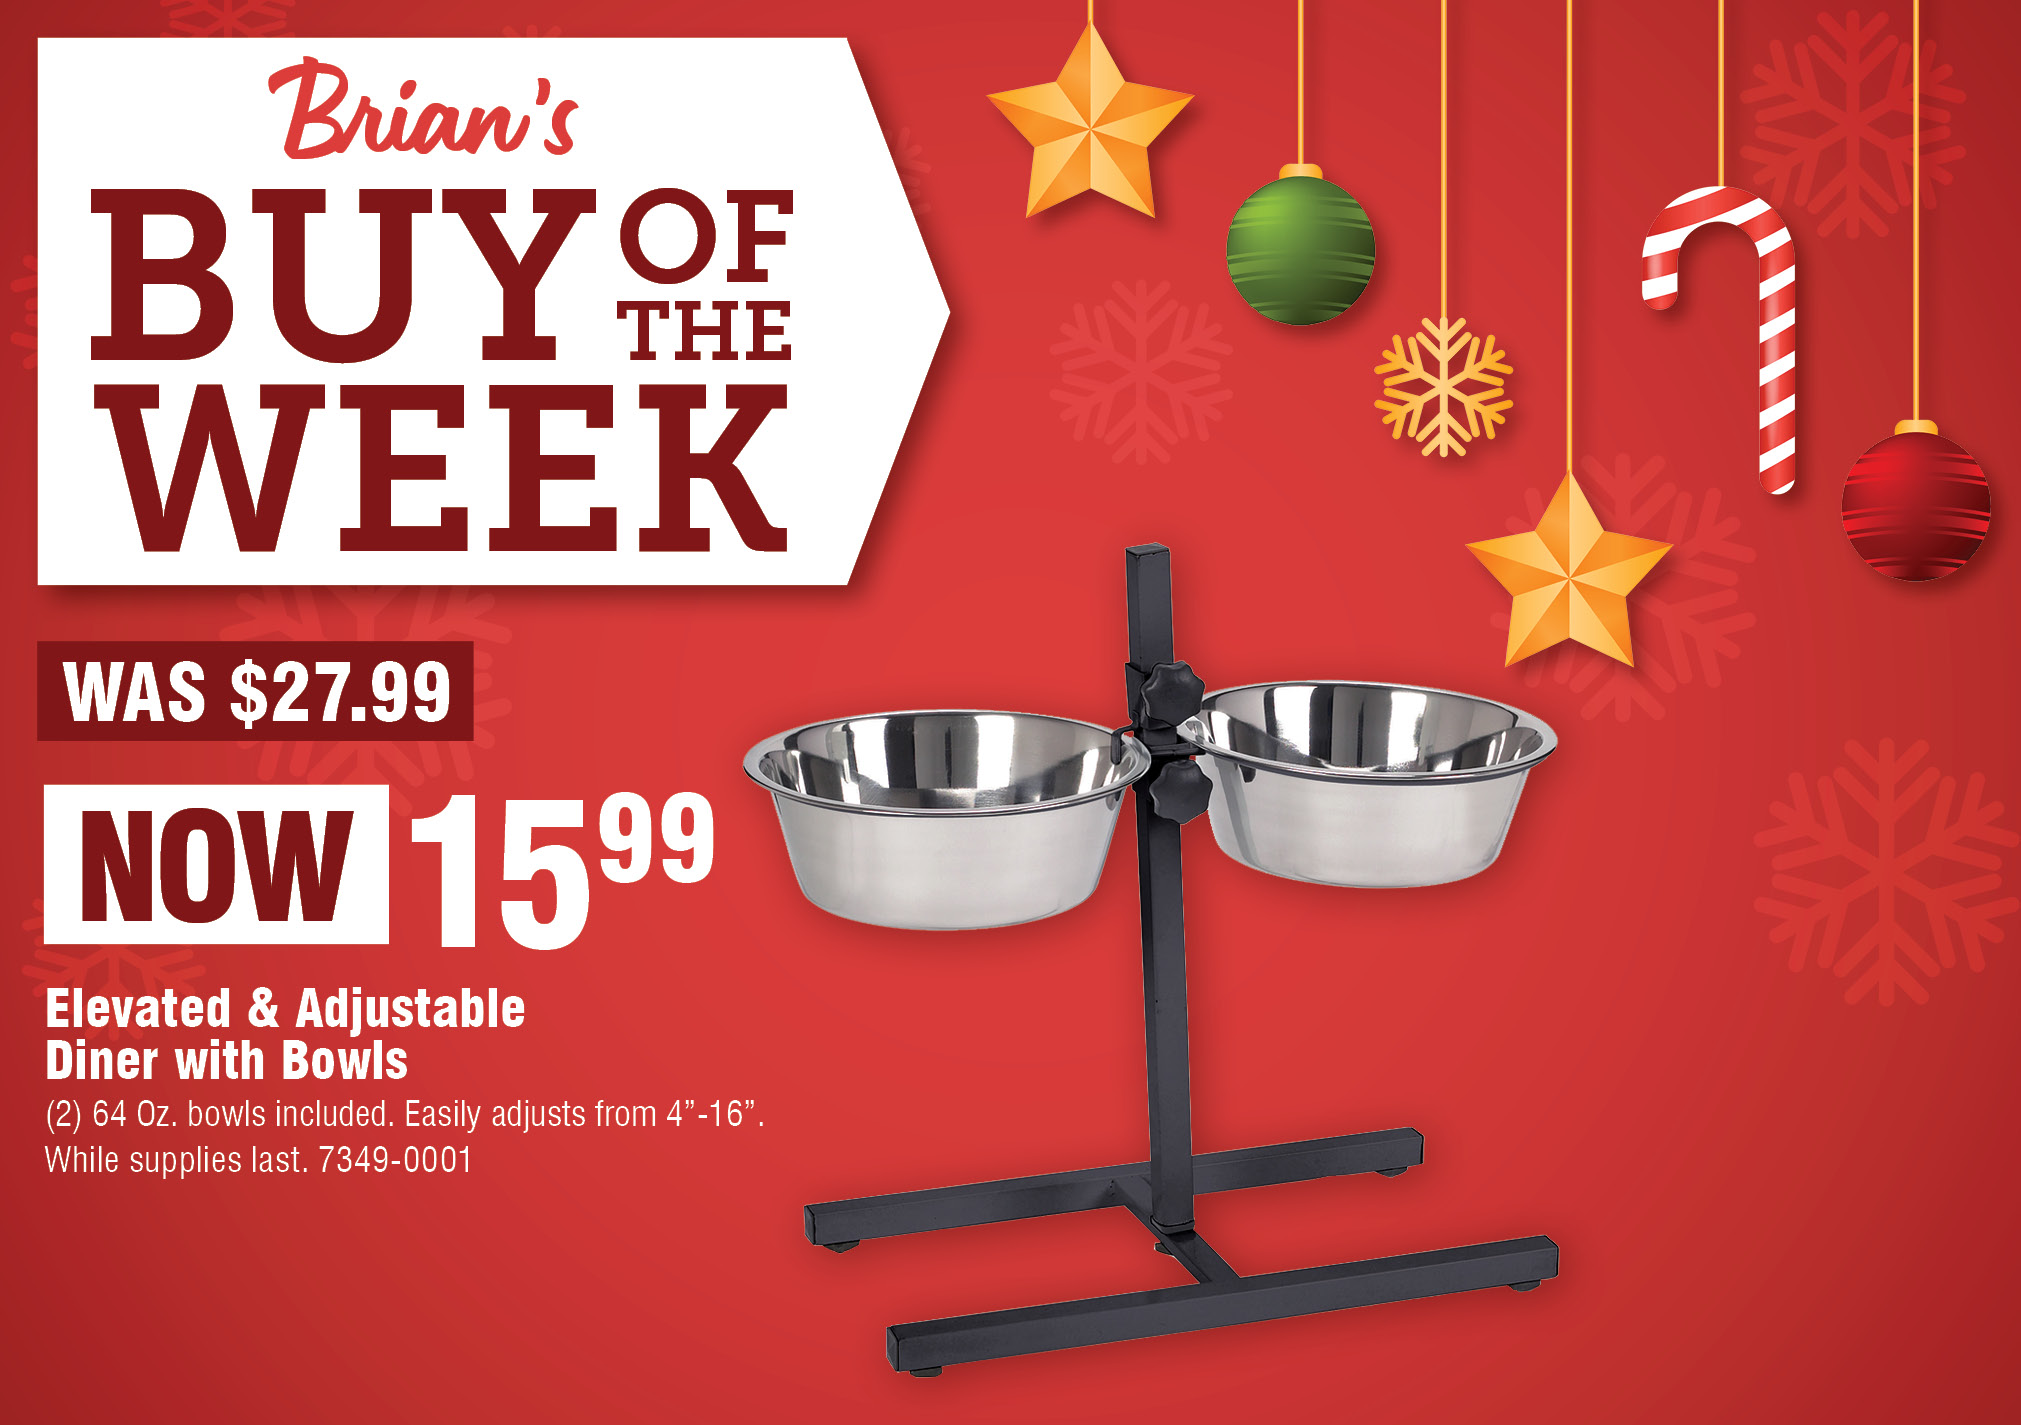 Buy of the Week, Elevated & Adjustable Diner with Bowls